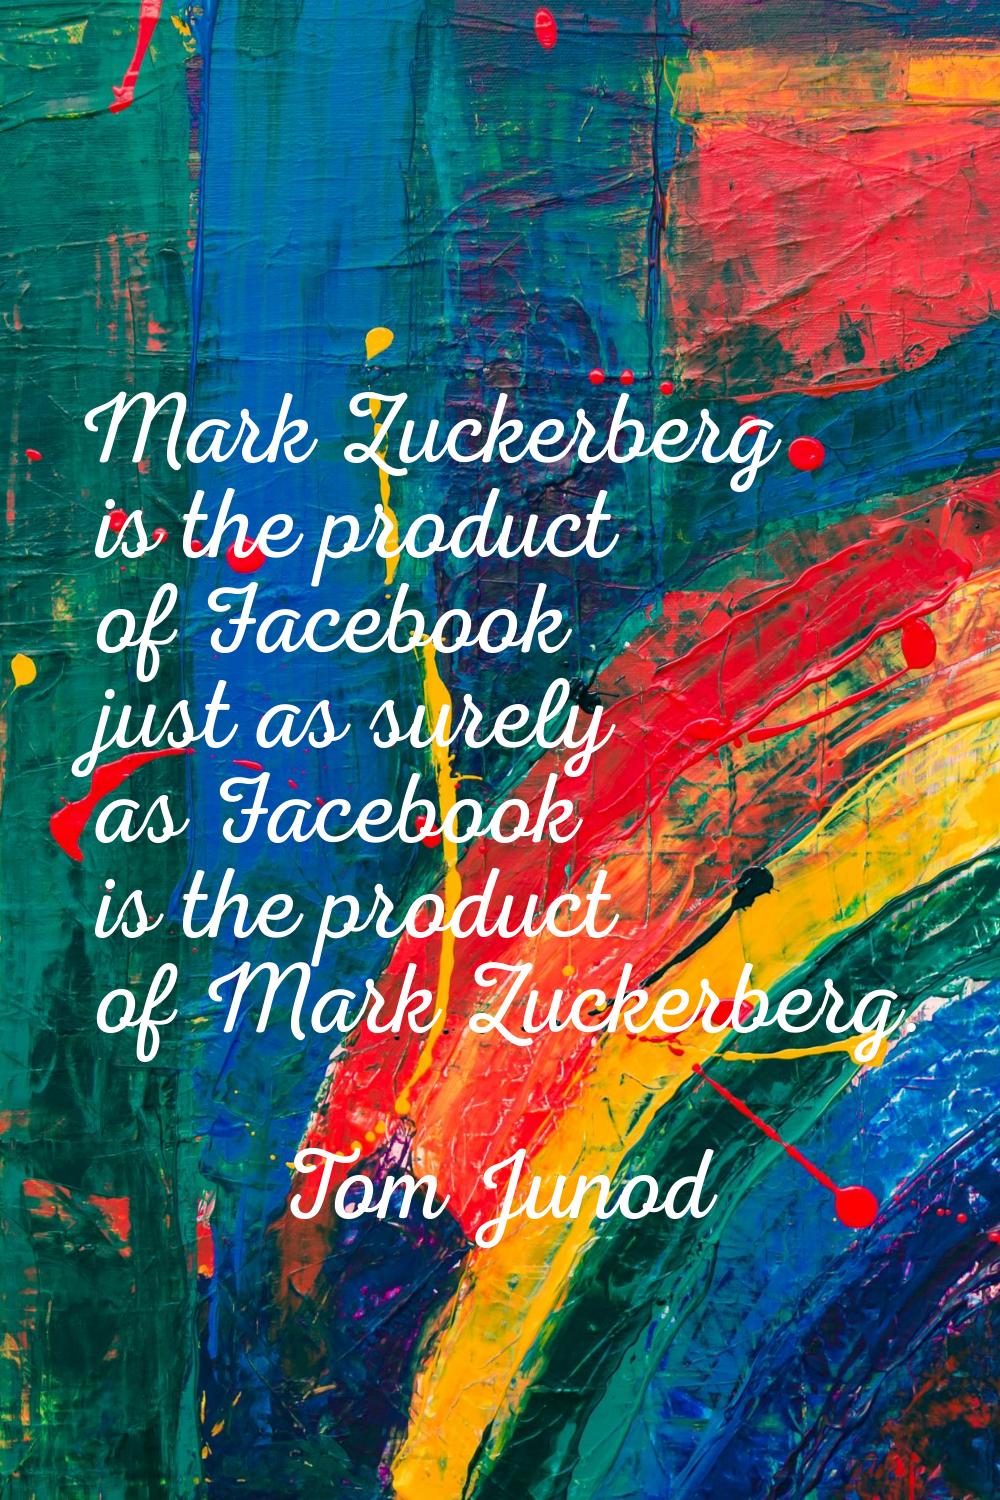 Mark Zuckerberg is the product of Facebook just as surely as Facebook is the product of Mark Zucker